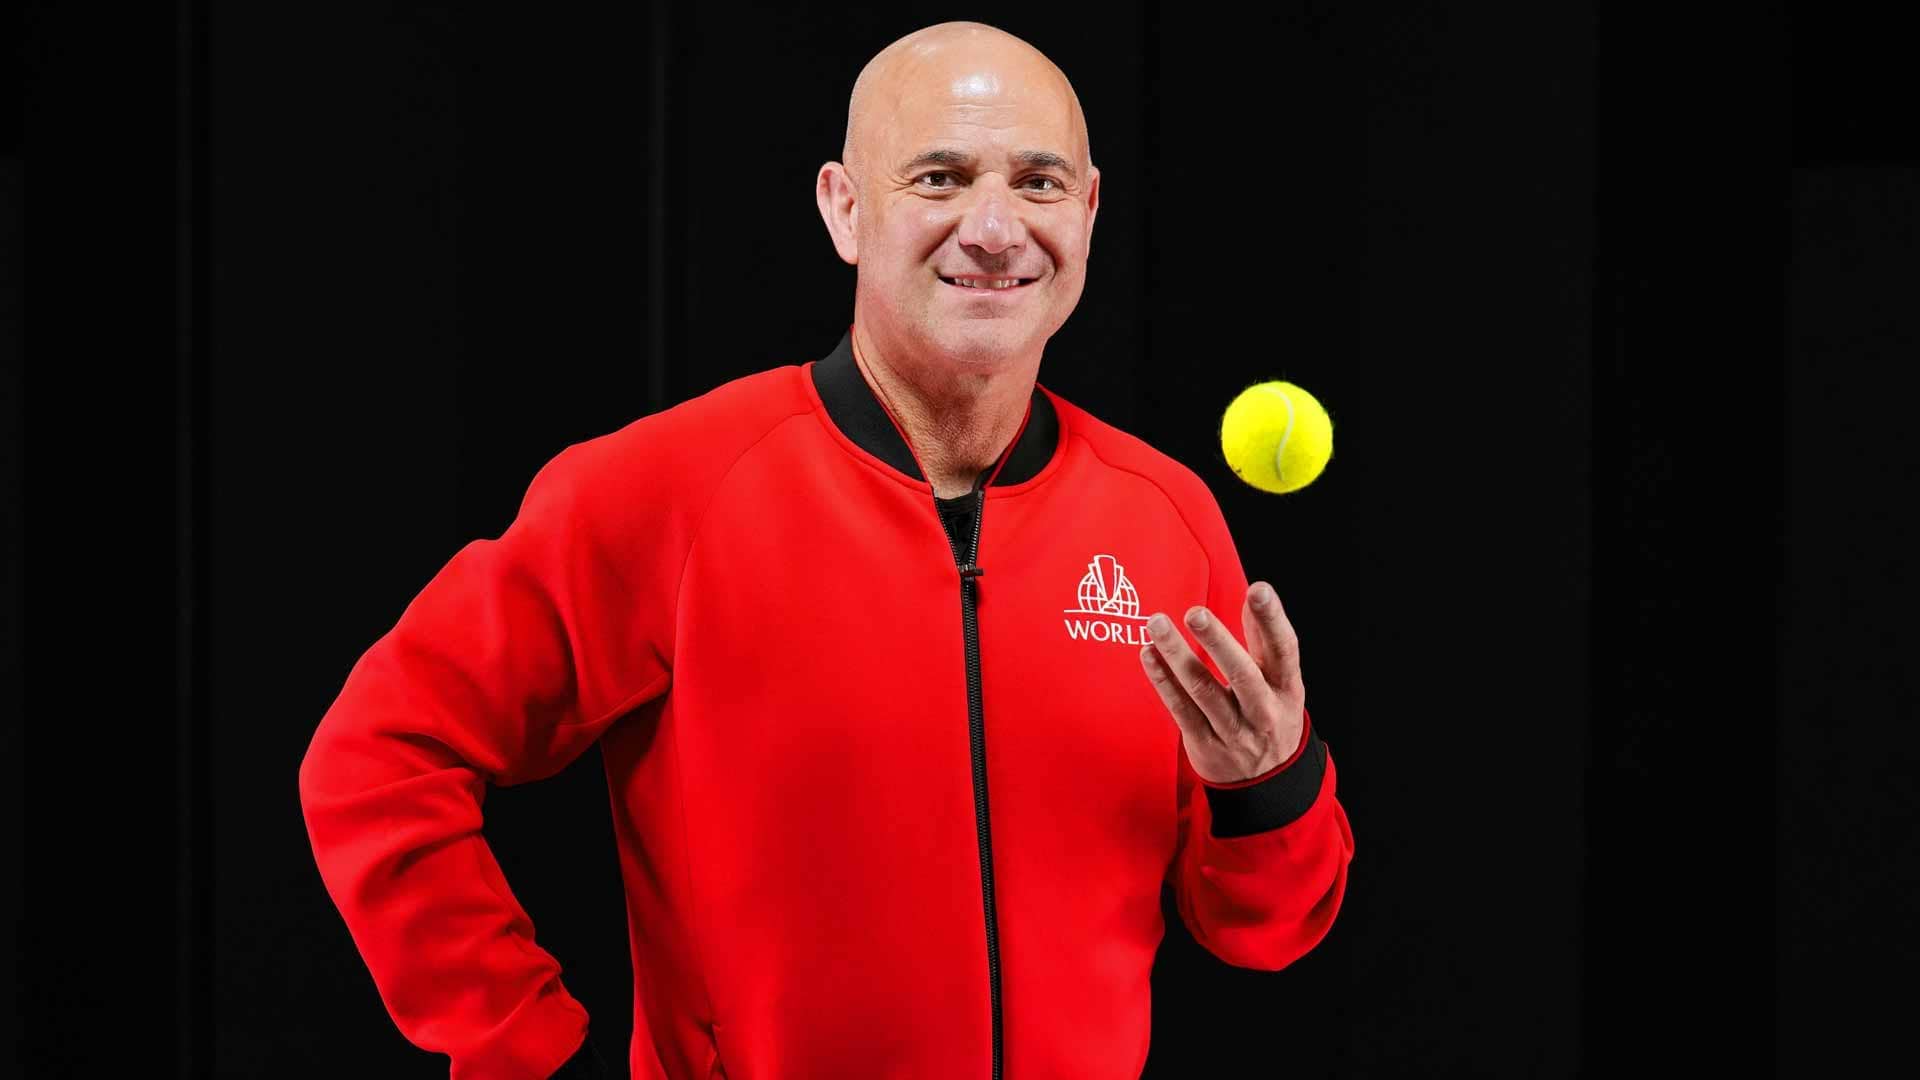 Andre Agassi's first event as Team World captain will be held in San Francisco.